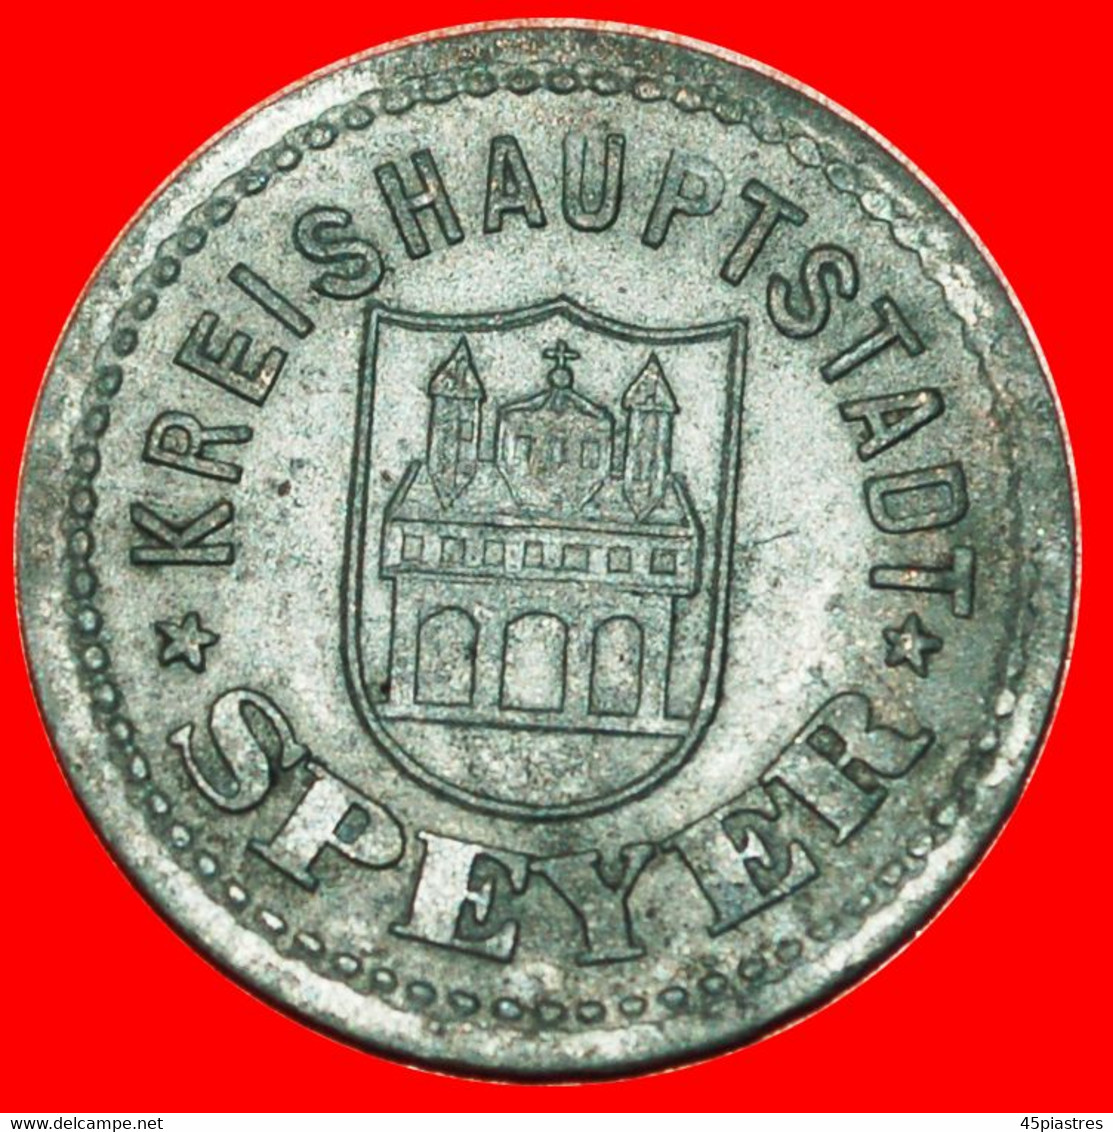 * STARS FRANKFURT: GERMANY SPEYER ★ 10 PFENNIGS 1917 UNCOMMON! TO BE PUBLISHED!!★LOW START ★ NO RESERVE! - Monetary/Of Necessity